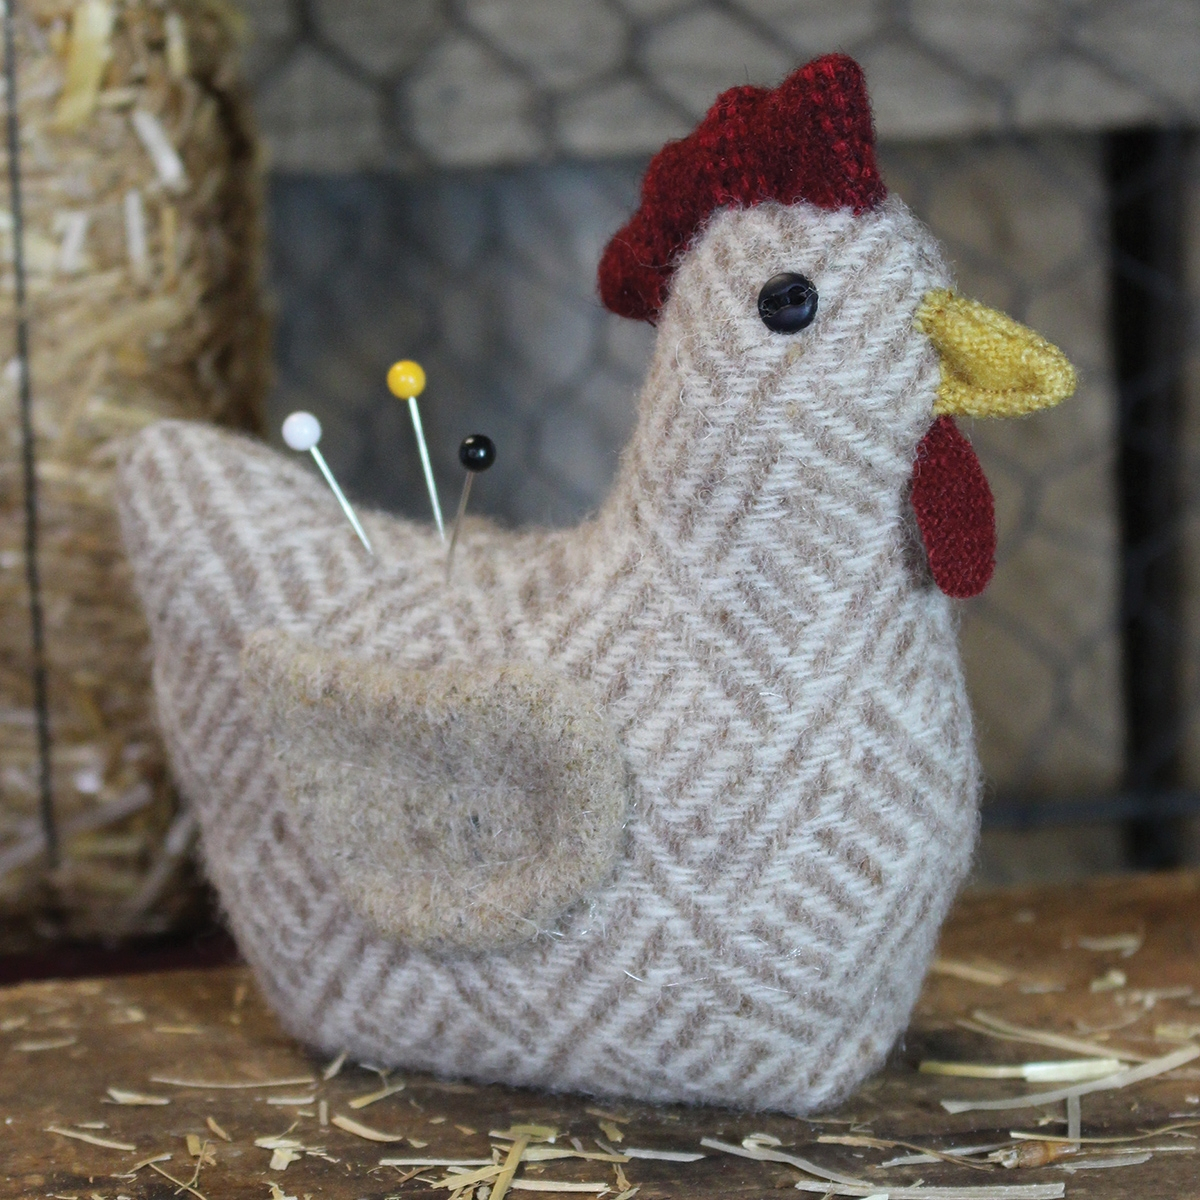 Chicken Embroidery Patterns Free Chicken Pincushion Pattern And Buttons